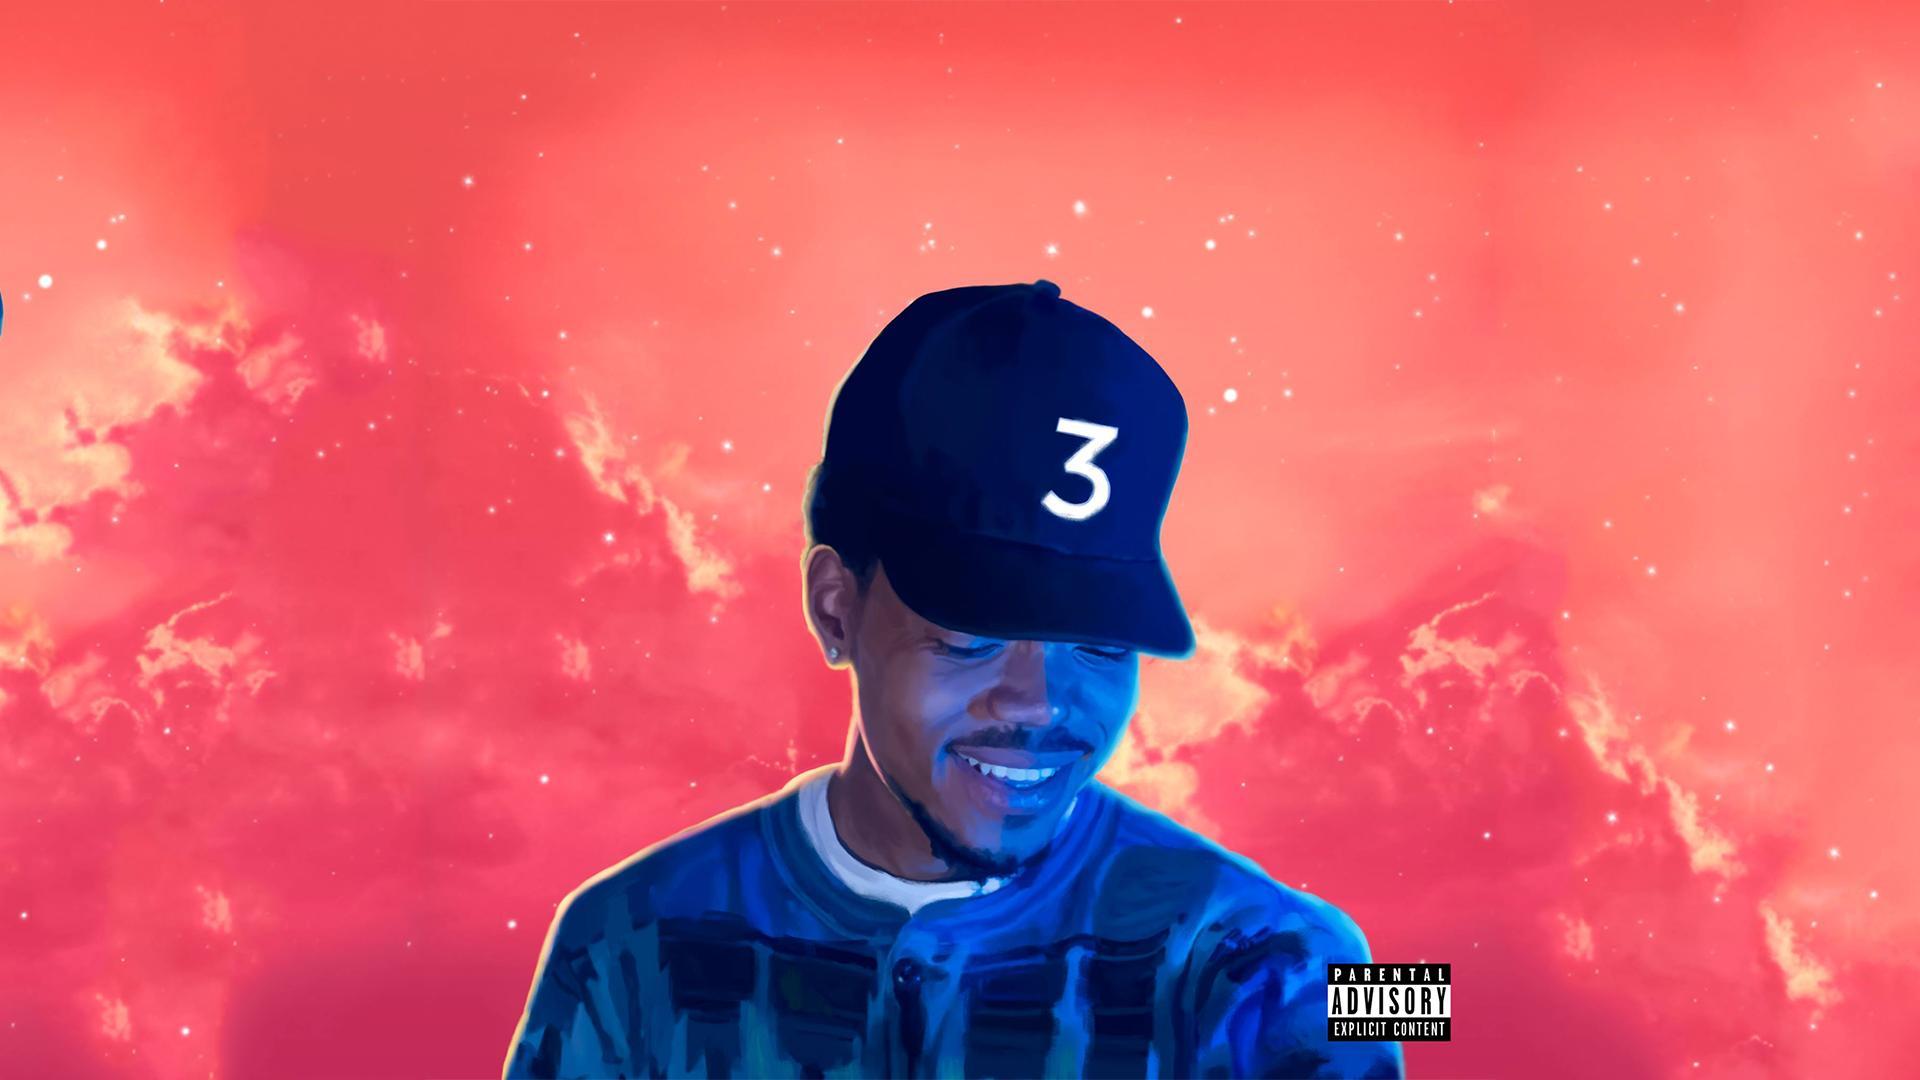 Chance the Rapper Wallpaper Free Chance the Rapper